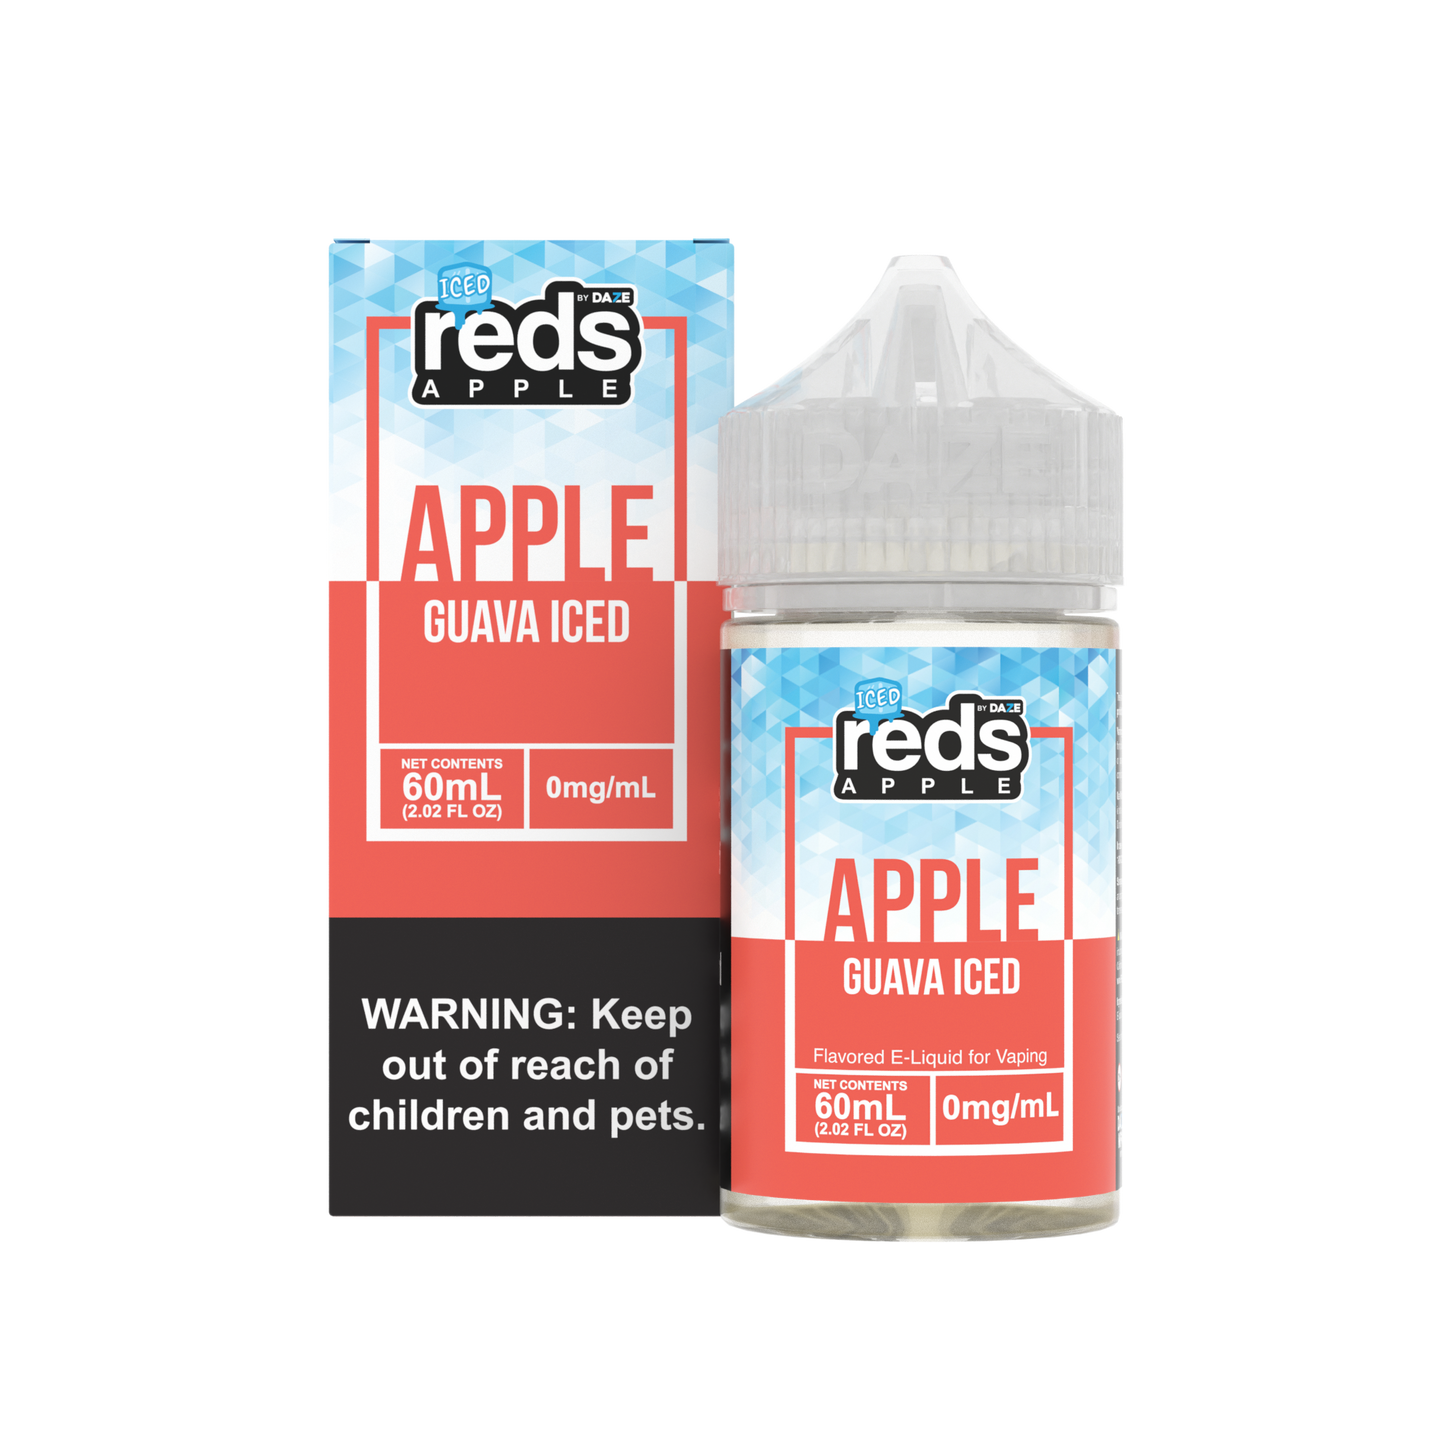 Reds: Apple Guava Iced